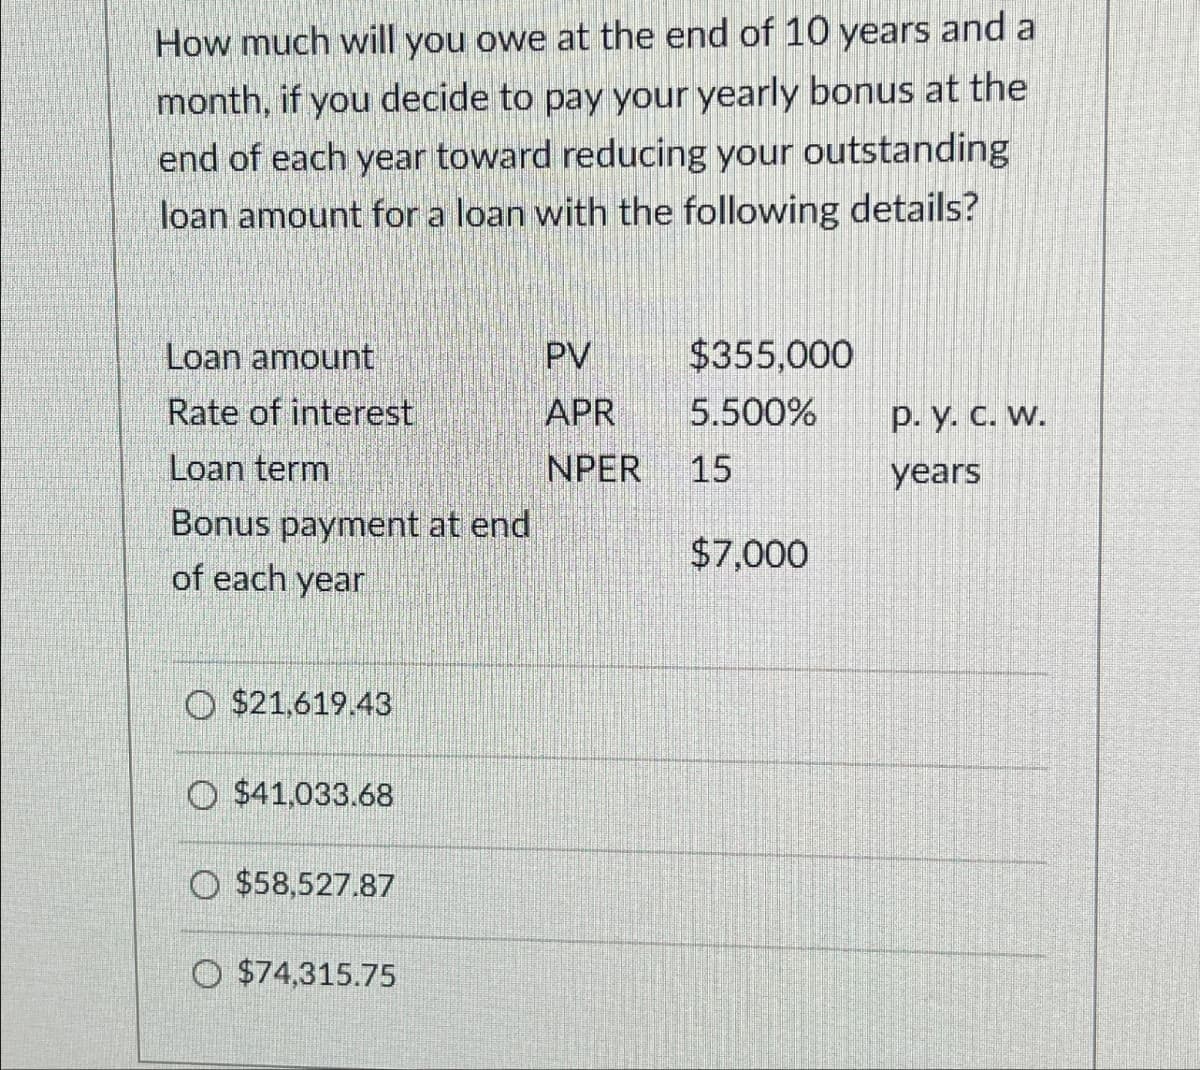 How much will you owe at the end of 10 years and a
month, if you decide to pay your yearly bonus at the
end of each year toward reducing your outstanding
loan amount for a loan with the following details?
Loan amount
PV
$355,000
Rate of interest
APR
5.500%
p. y. c. w.
Loan term
NPER
15
years
Bonus payment at end
$7,000
of each year
$21,619.43
$41,033.68
$58,527.87
$74,315.75